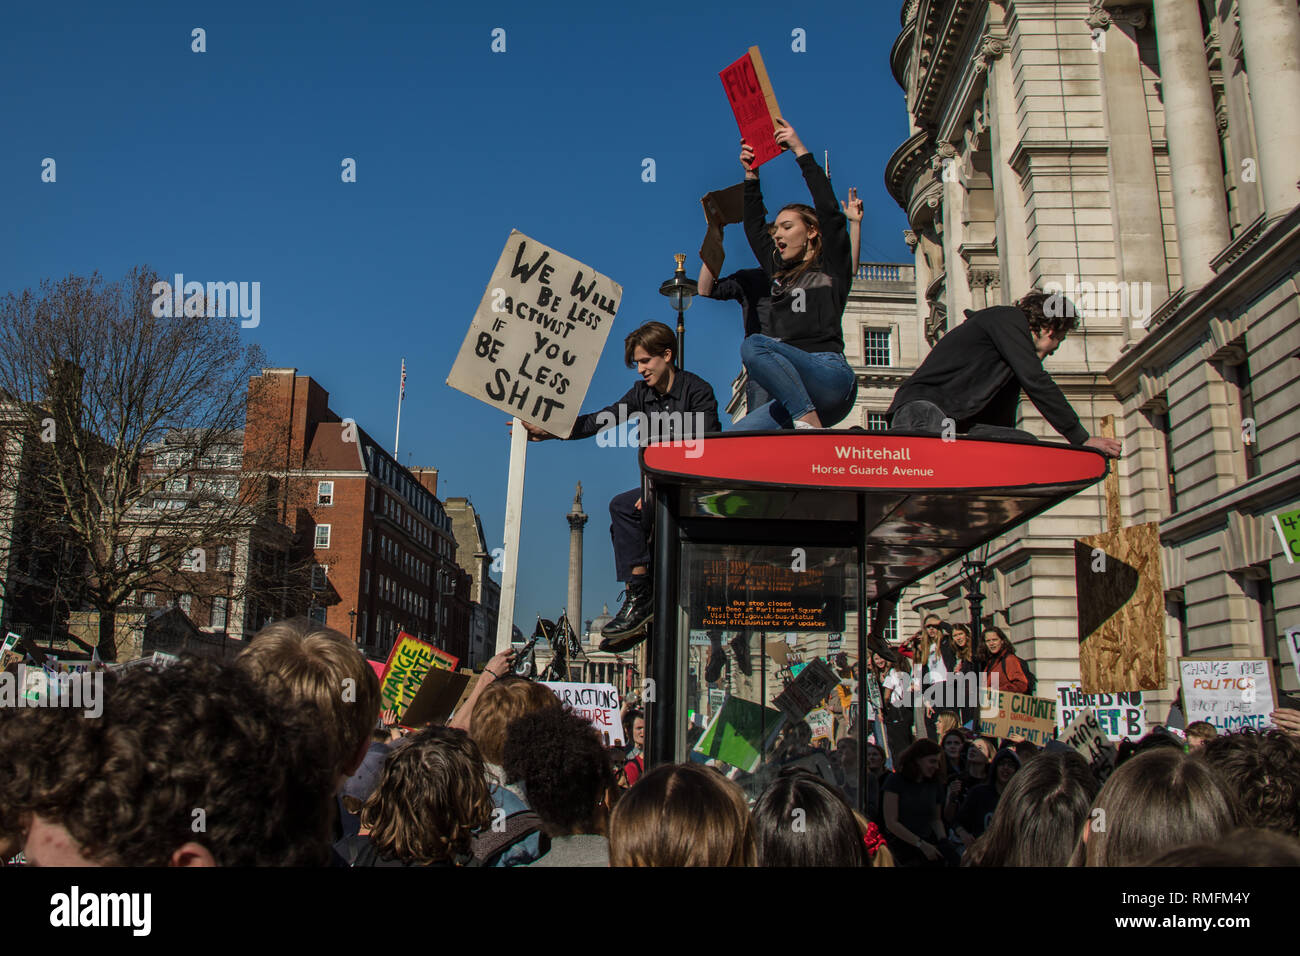 London, UK. 15 February, 2019. On top of a bus stop on Whitehall. Children took a day off school to join the climate rebellion, the young protesters rallied in Parliament Square to demand urgent government action. David Rowe/ Alamy Live News. Stock Photo